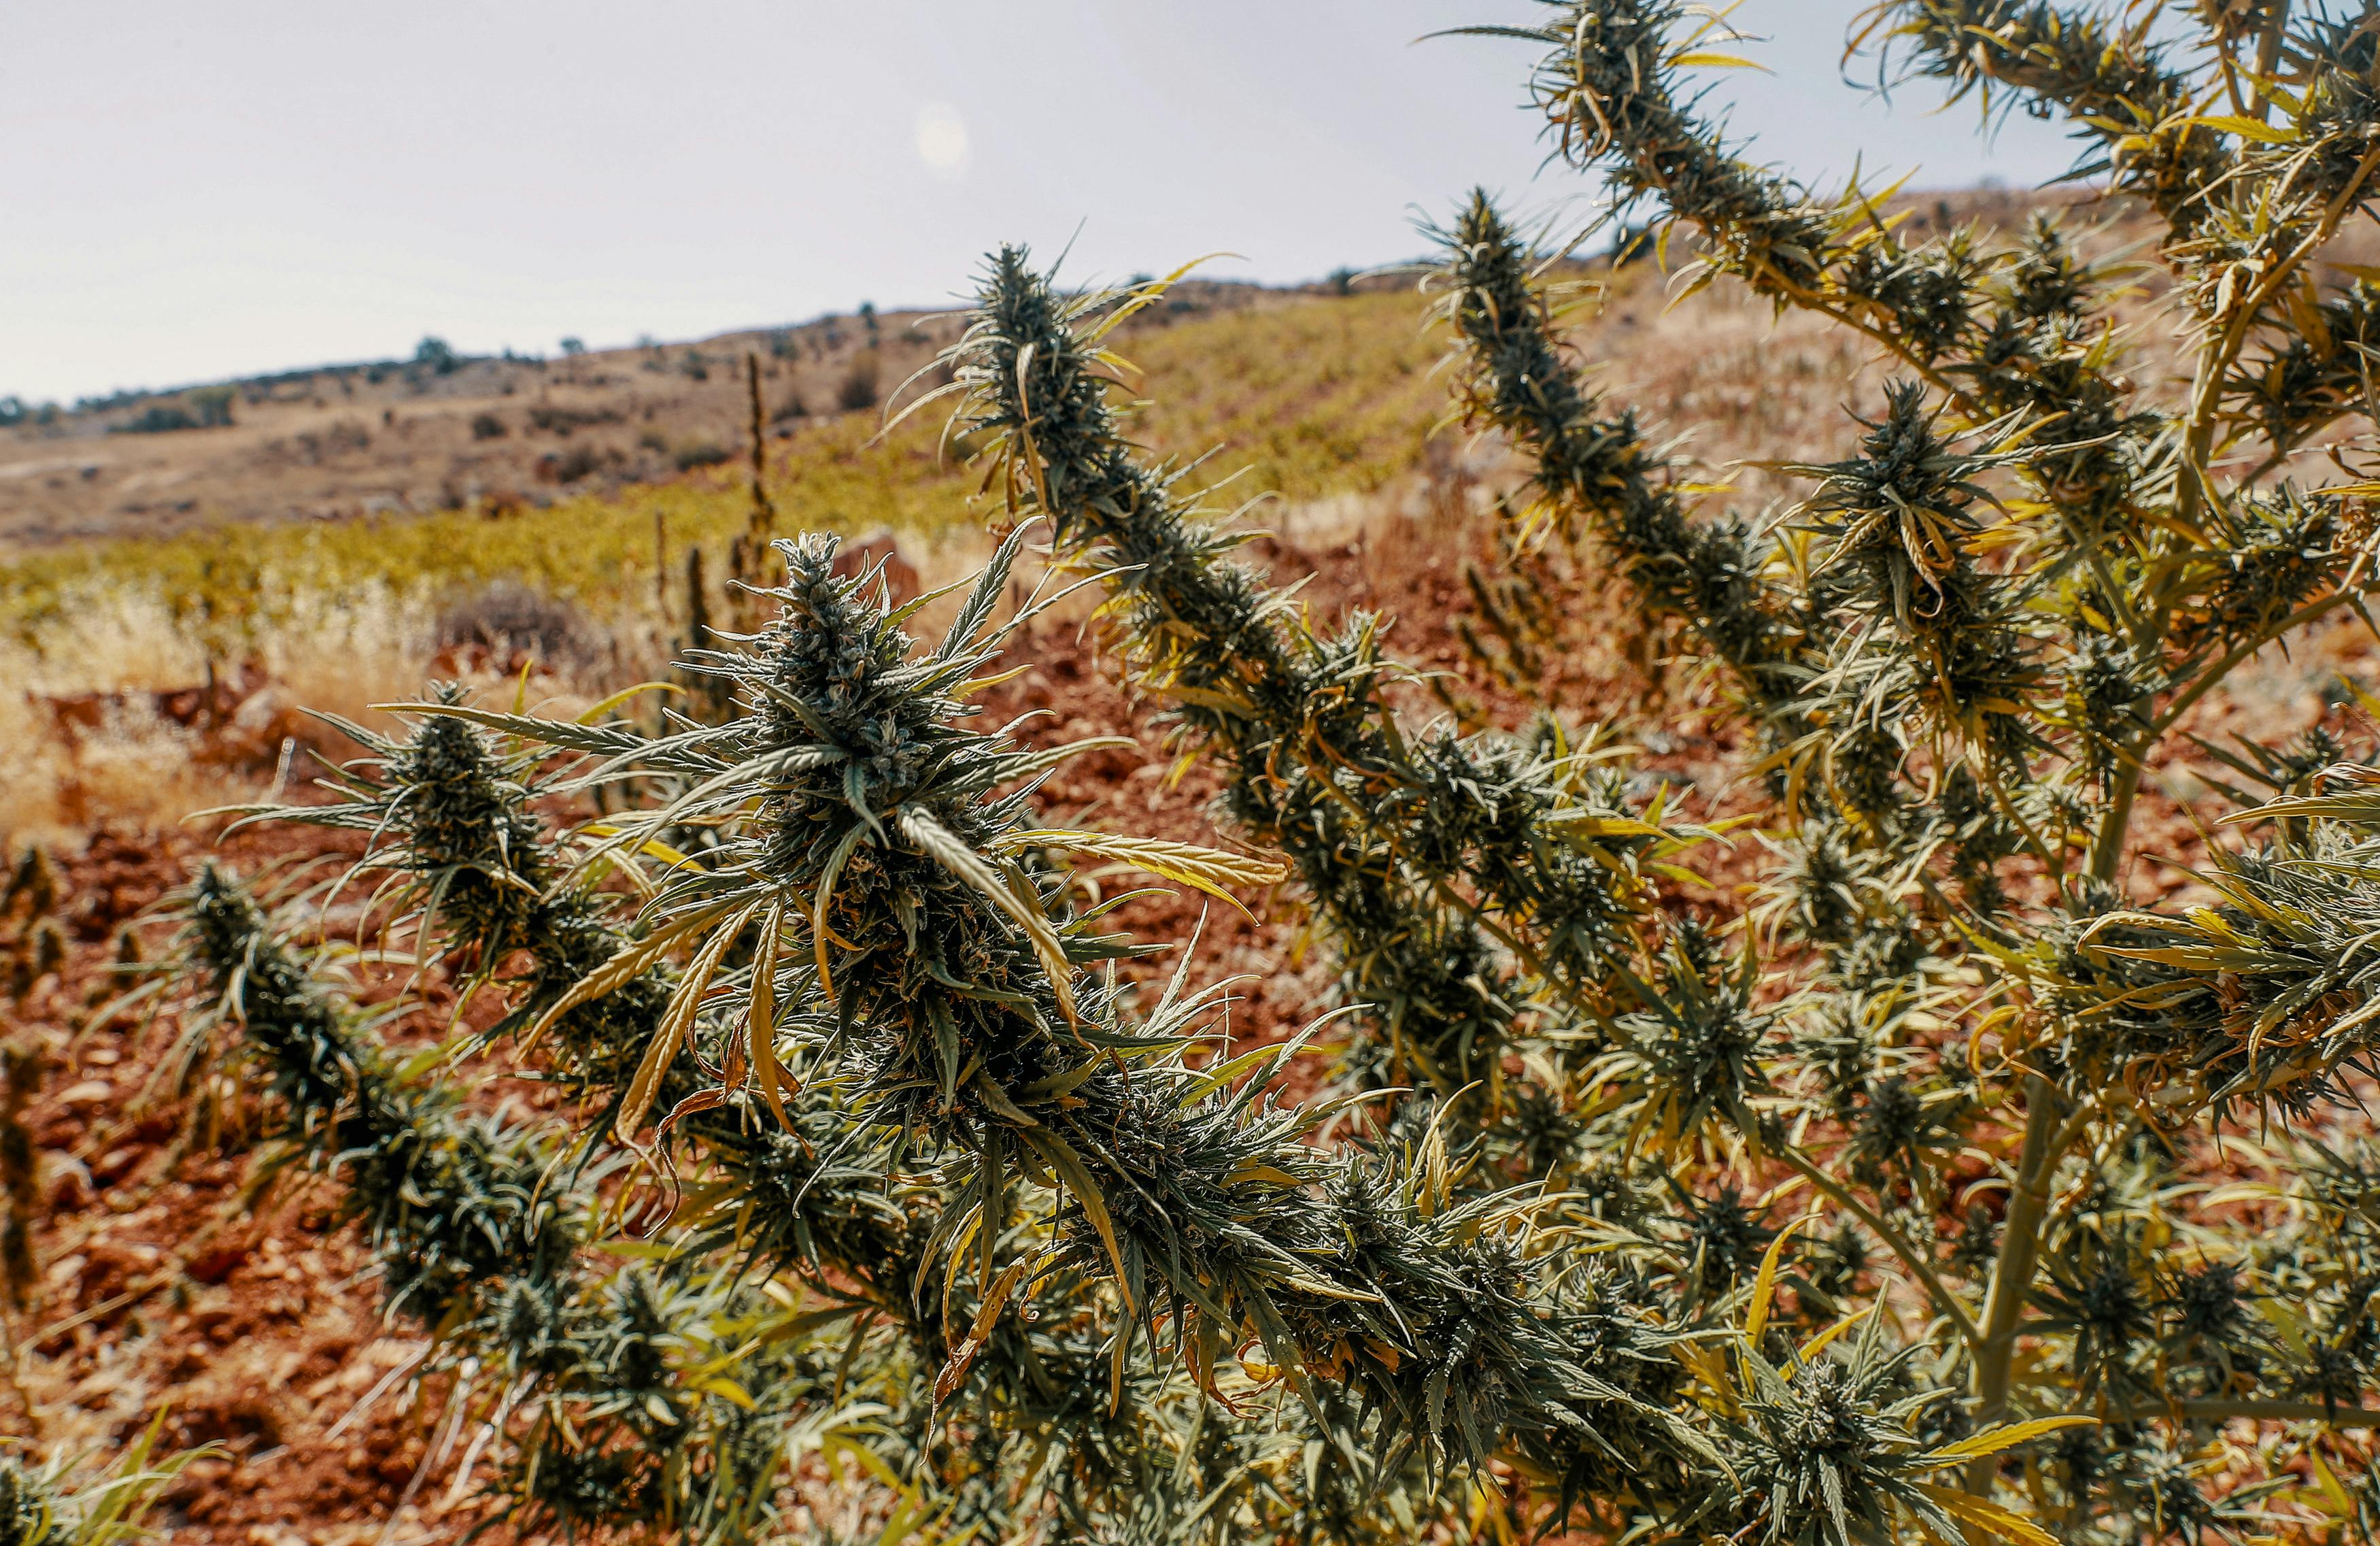 What Are Landrace Strains11 Landrace Strains: Everything You Need To Know About Landrace Cannabis Strains